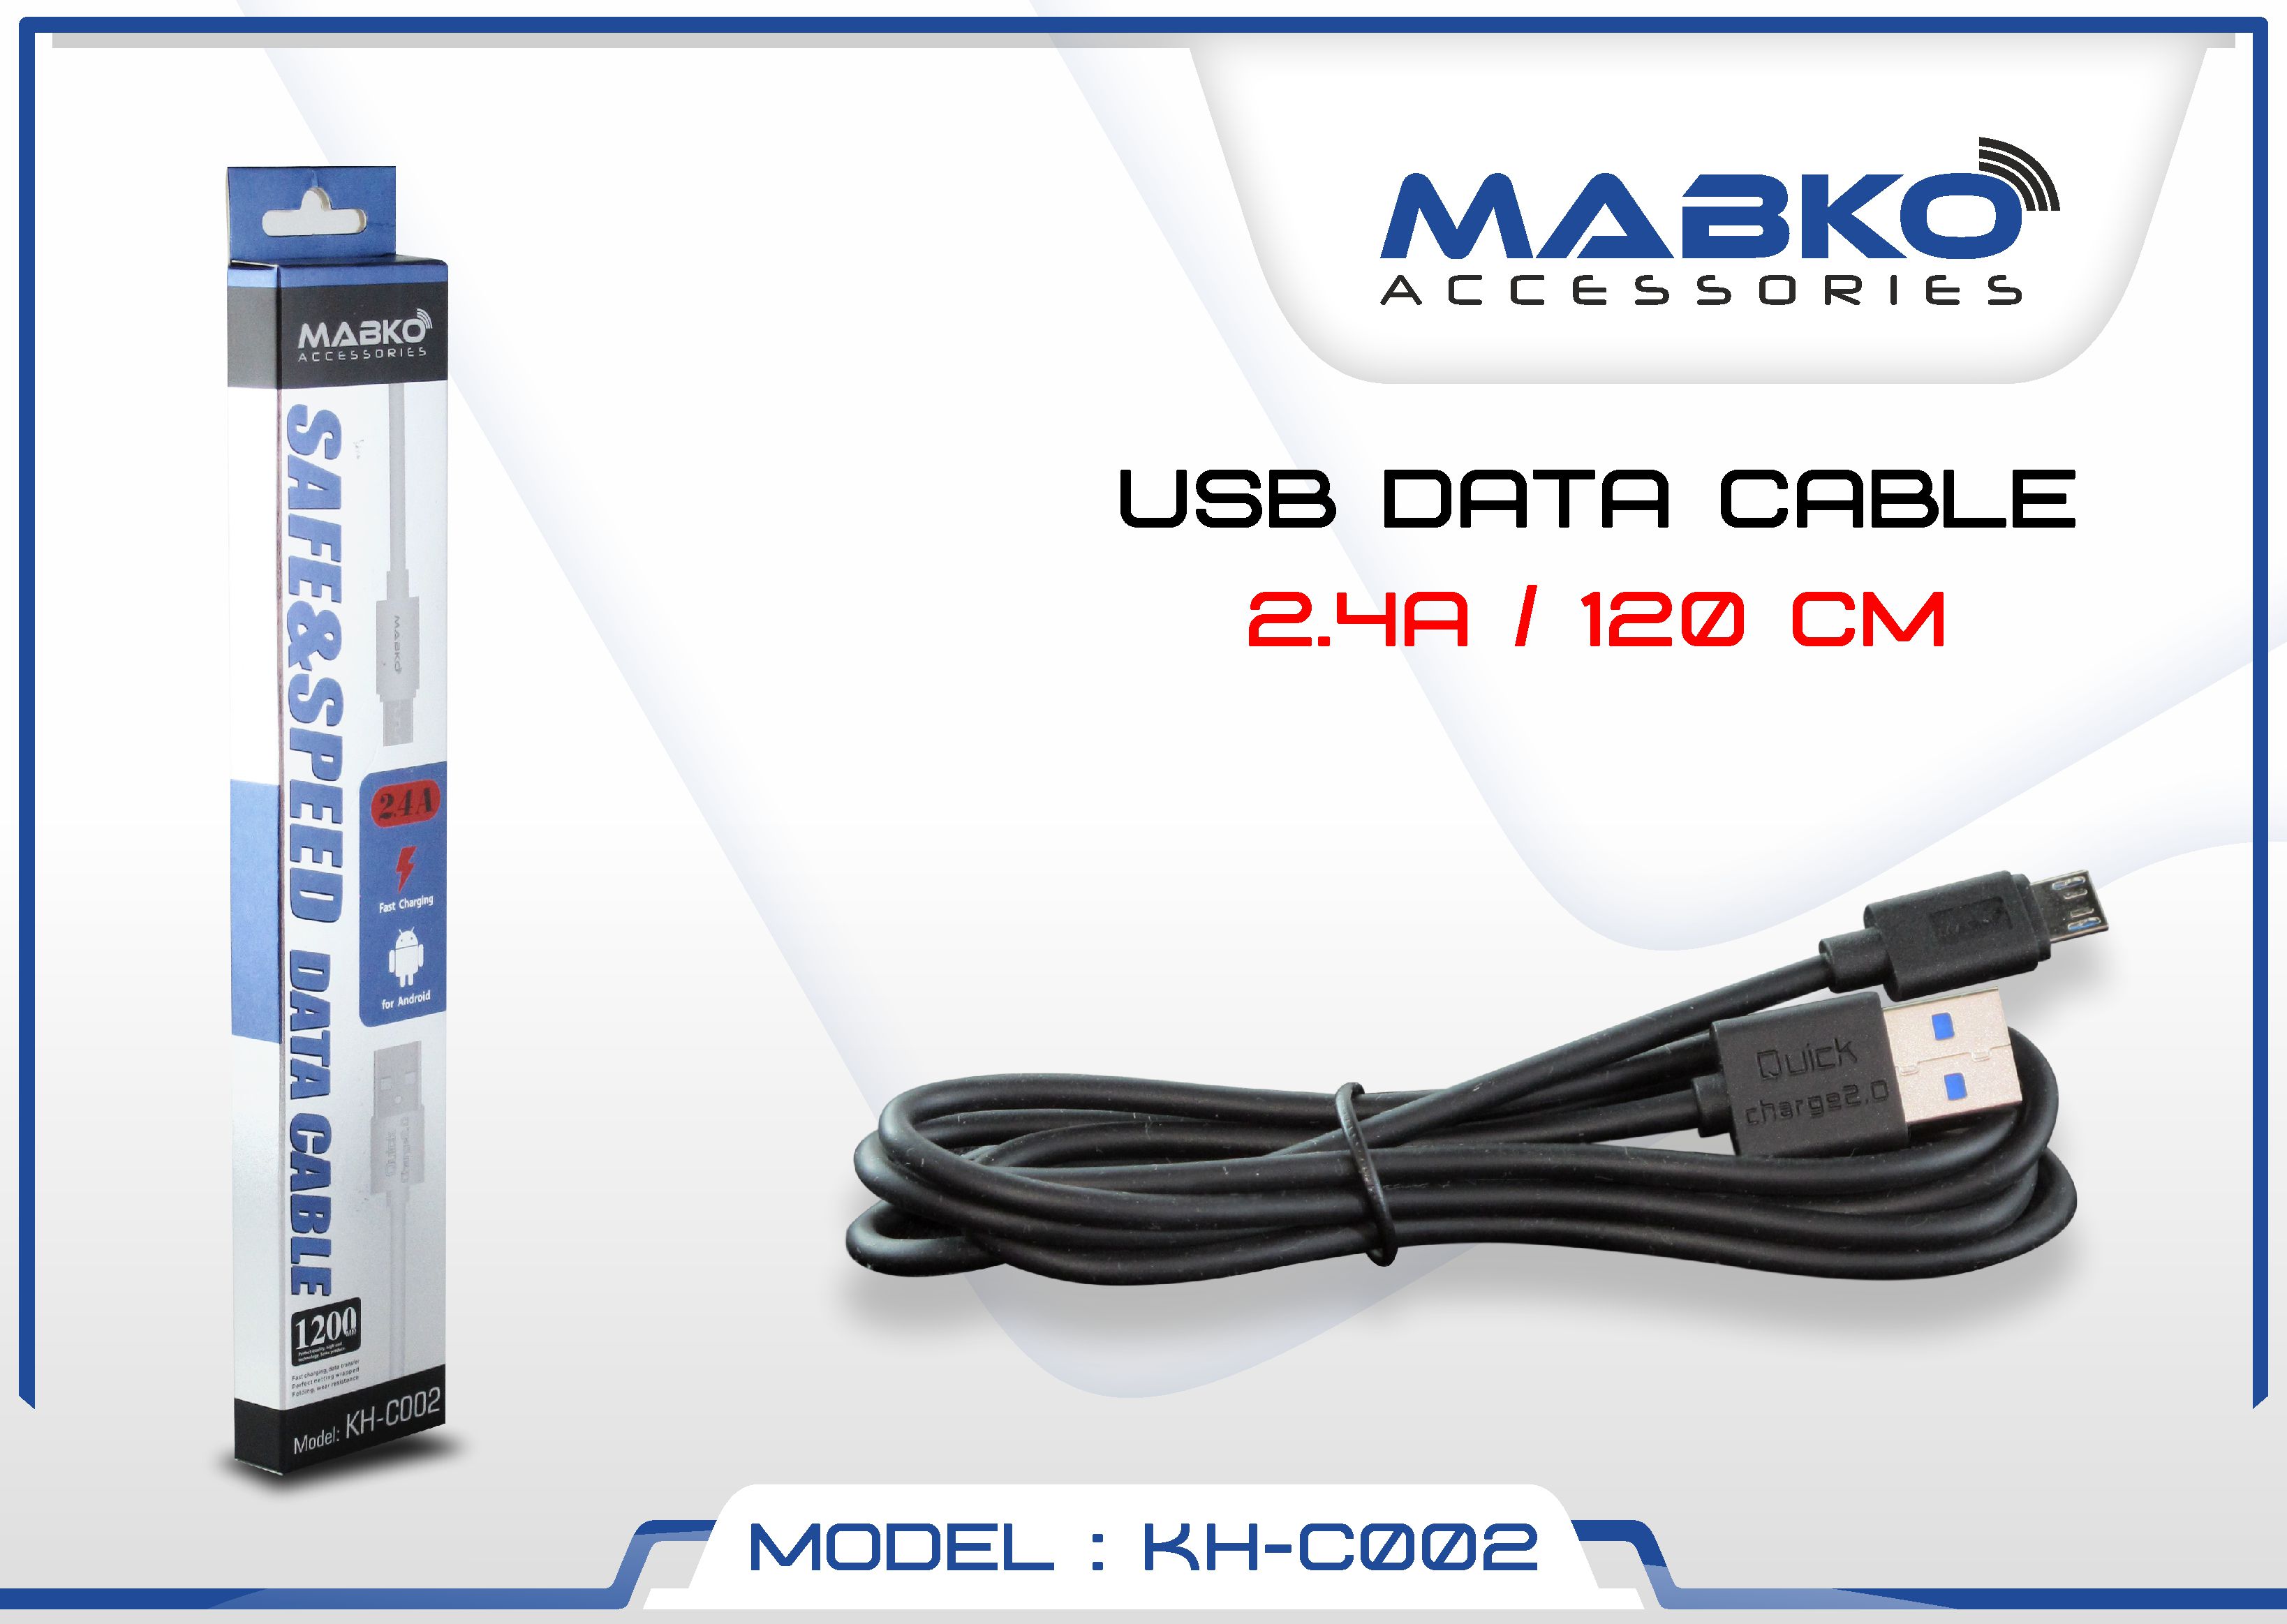 (MABKO MAGNATIC CABLE KH-13 (TYPE C